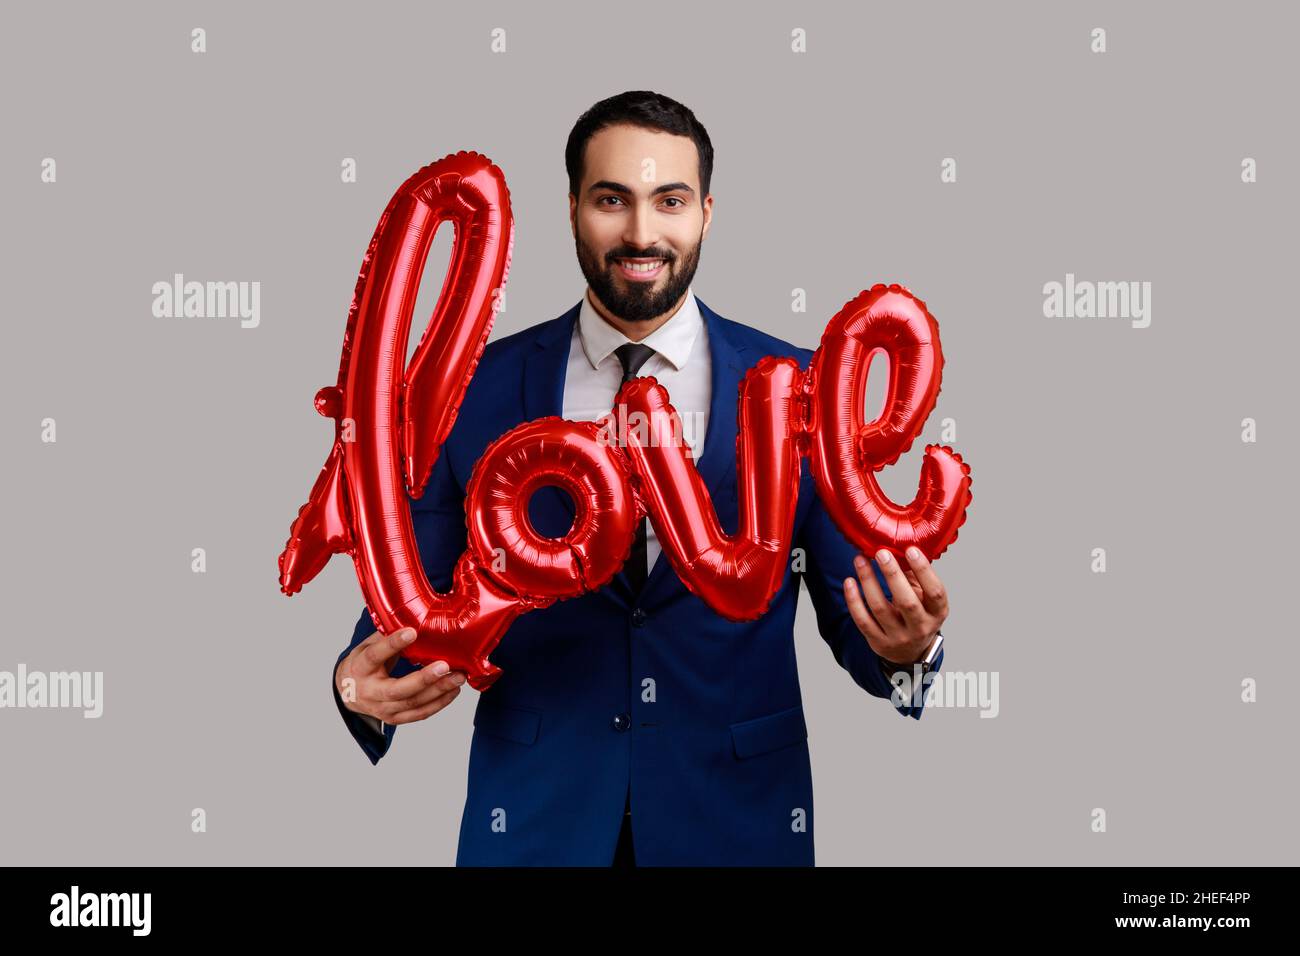 Bearded businessman holding love word of foil balloons, expressing positive emotions and his feelings, wearing official style suit. Indoor studio shot isolated on gray background. Stock Photo